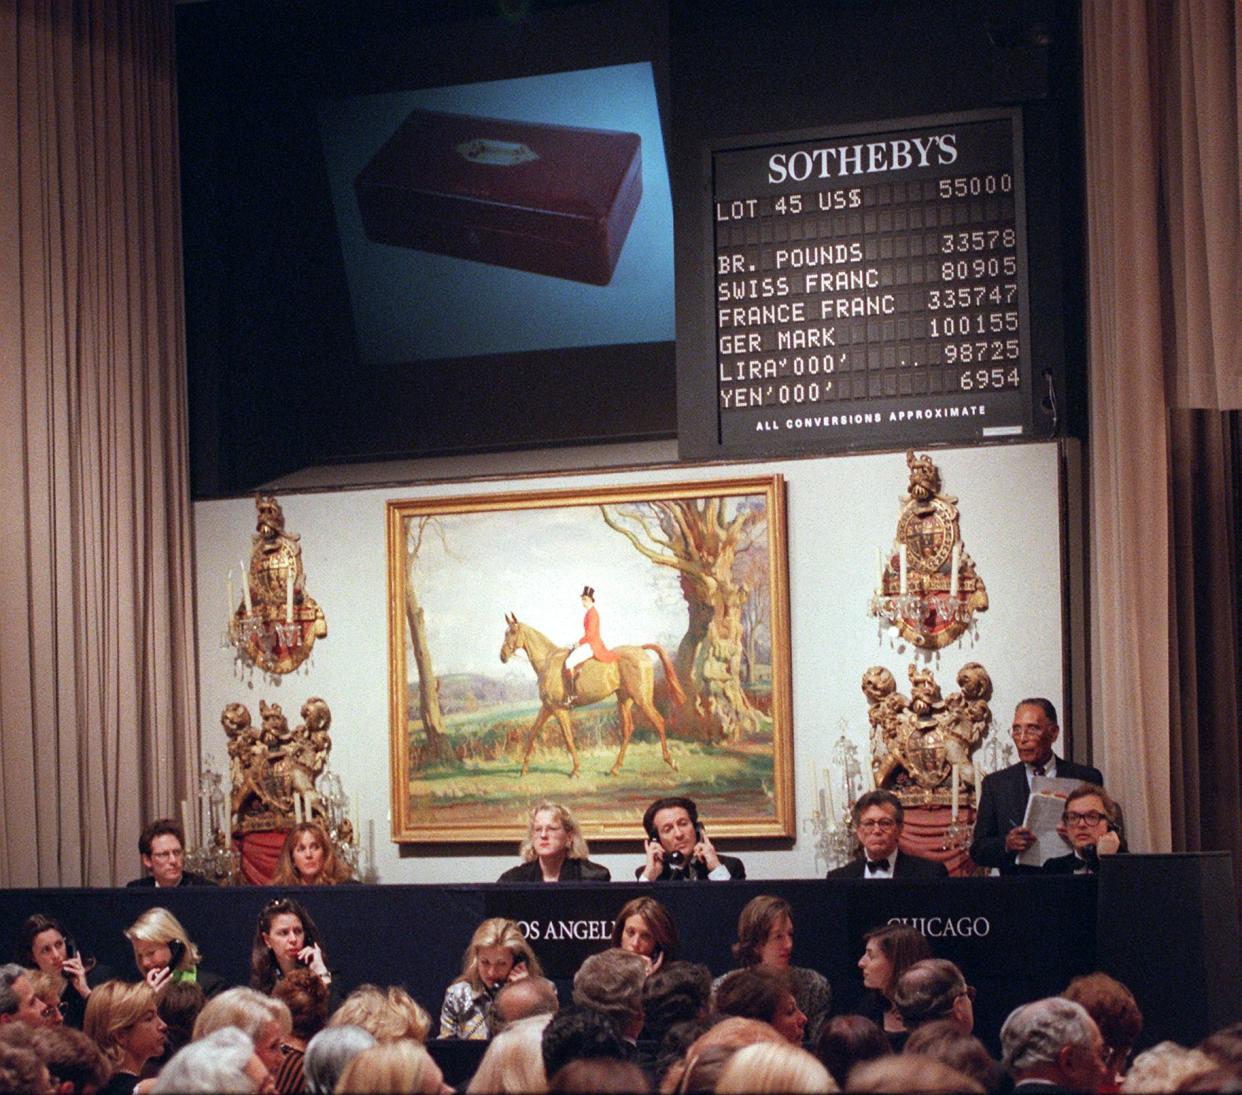 NEW YORK, UNITED STATES:  Sotheby's employees take telephone bids from Chicago and Los Angeles on the red leather dispatch box of King Edward VIII, seen in photo at top, on the first night of the auction of the contents of the Paris residence of the Duke and Duchess of Windsor 19 February. This item brought 57,500 USD, well above its catalog estimate of 10,000 to 15,000 USD.   AFP PHOTO/Henny Ray ABRAMS (Photo credit should read HENNY RAY ABRAMS/AFP via Getty Images)